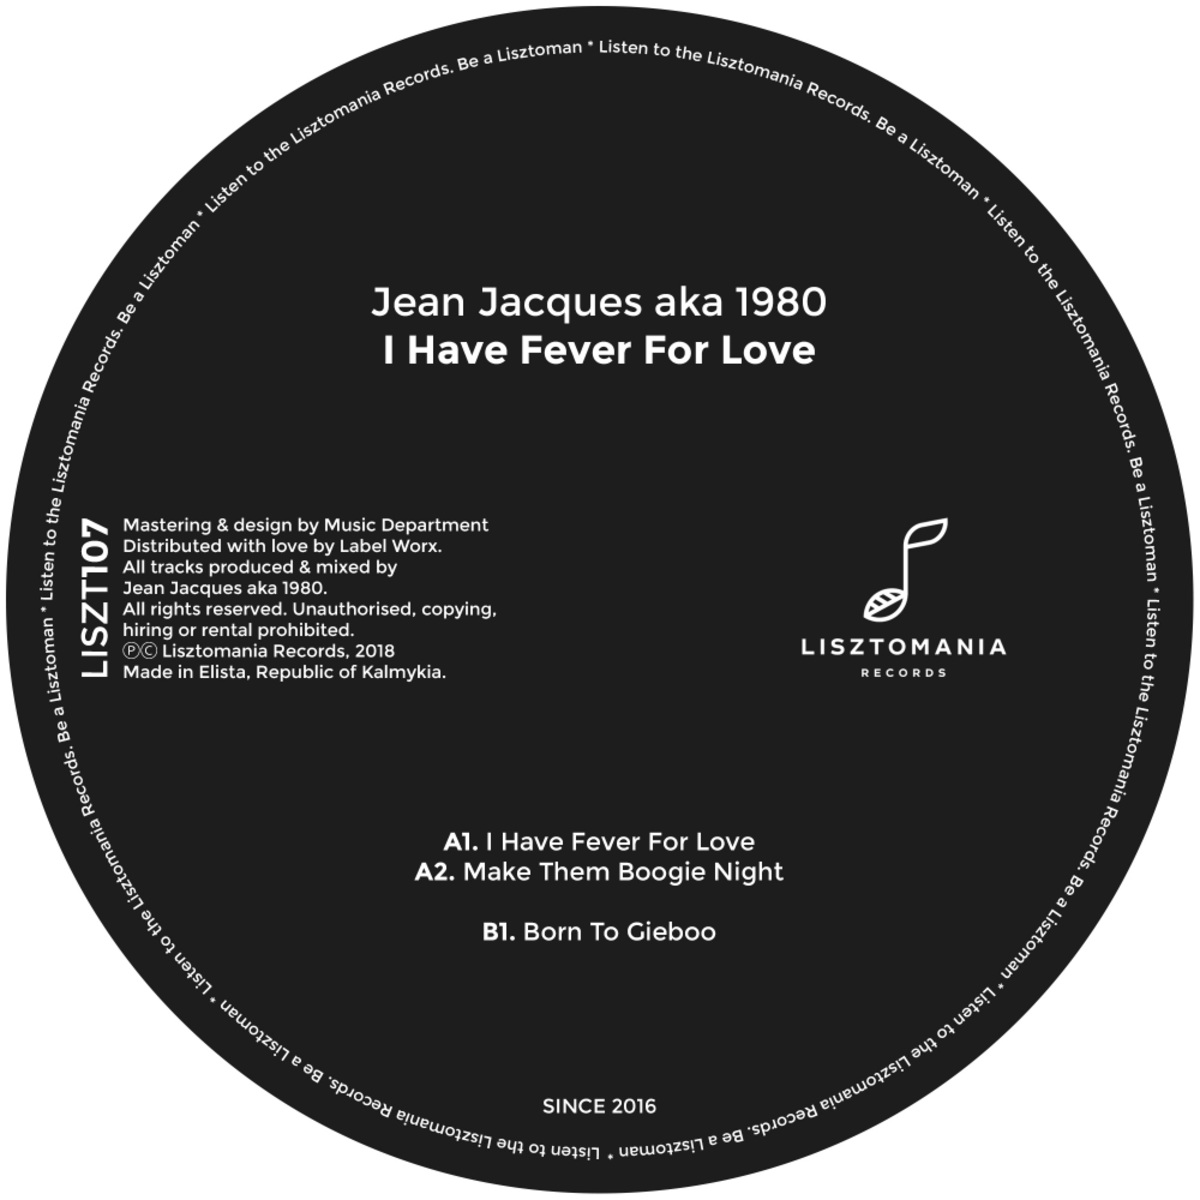 Jean Jacques aka 1980 - I Have Fever For Love / Lisztomania Records